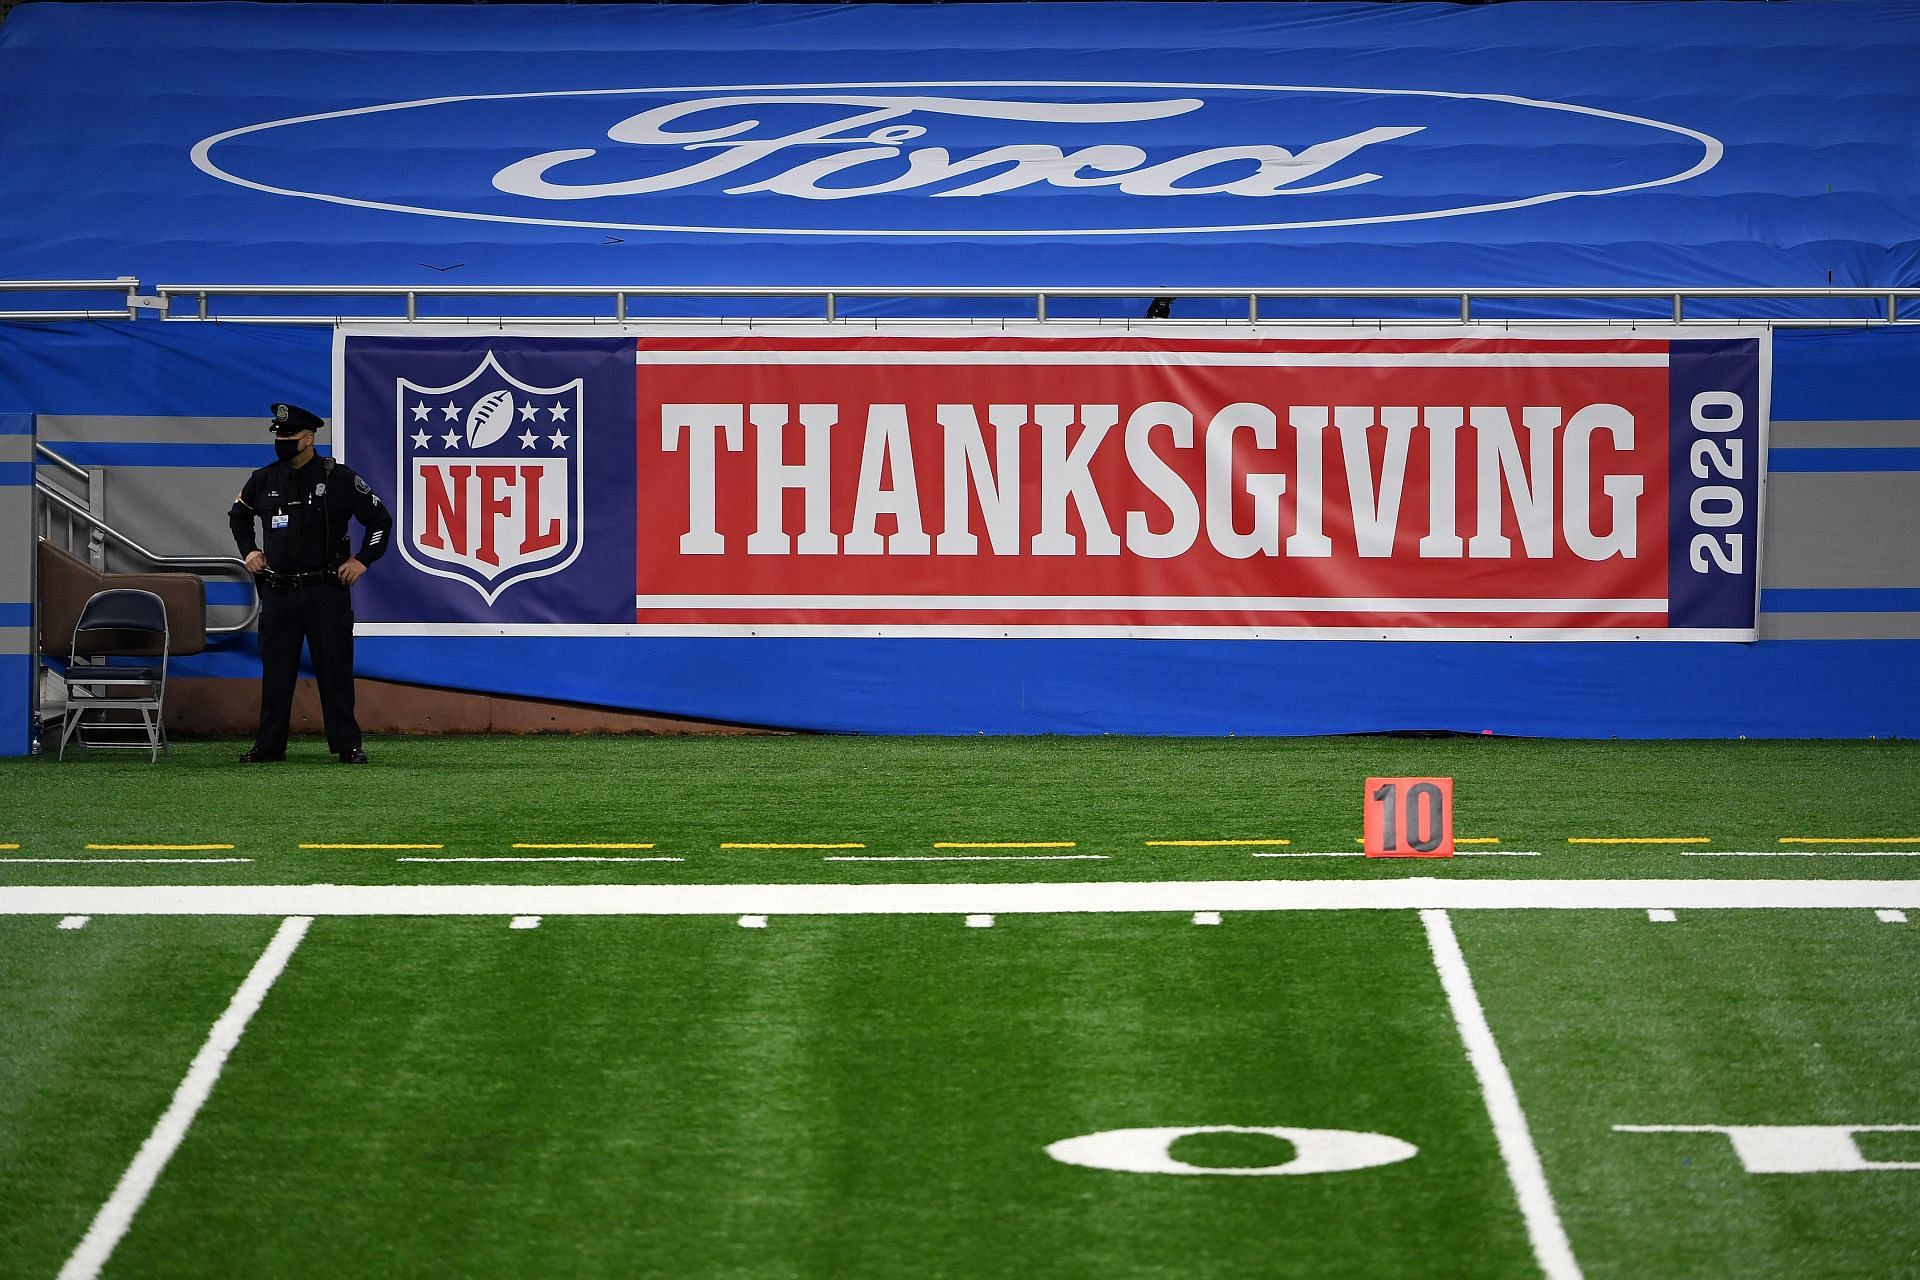 NFL Thanksgiving Games: How to Watch & Stream from Anywhere – Billboard